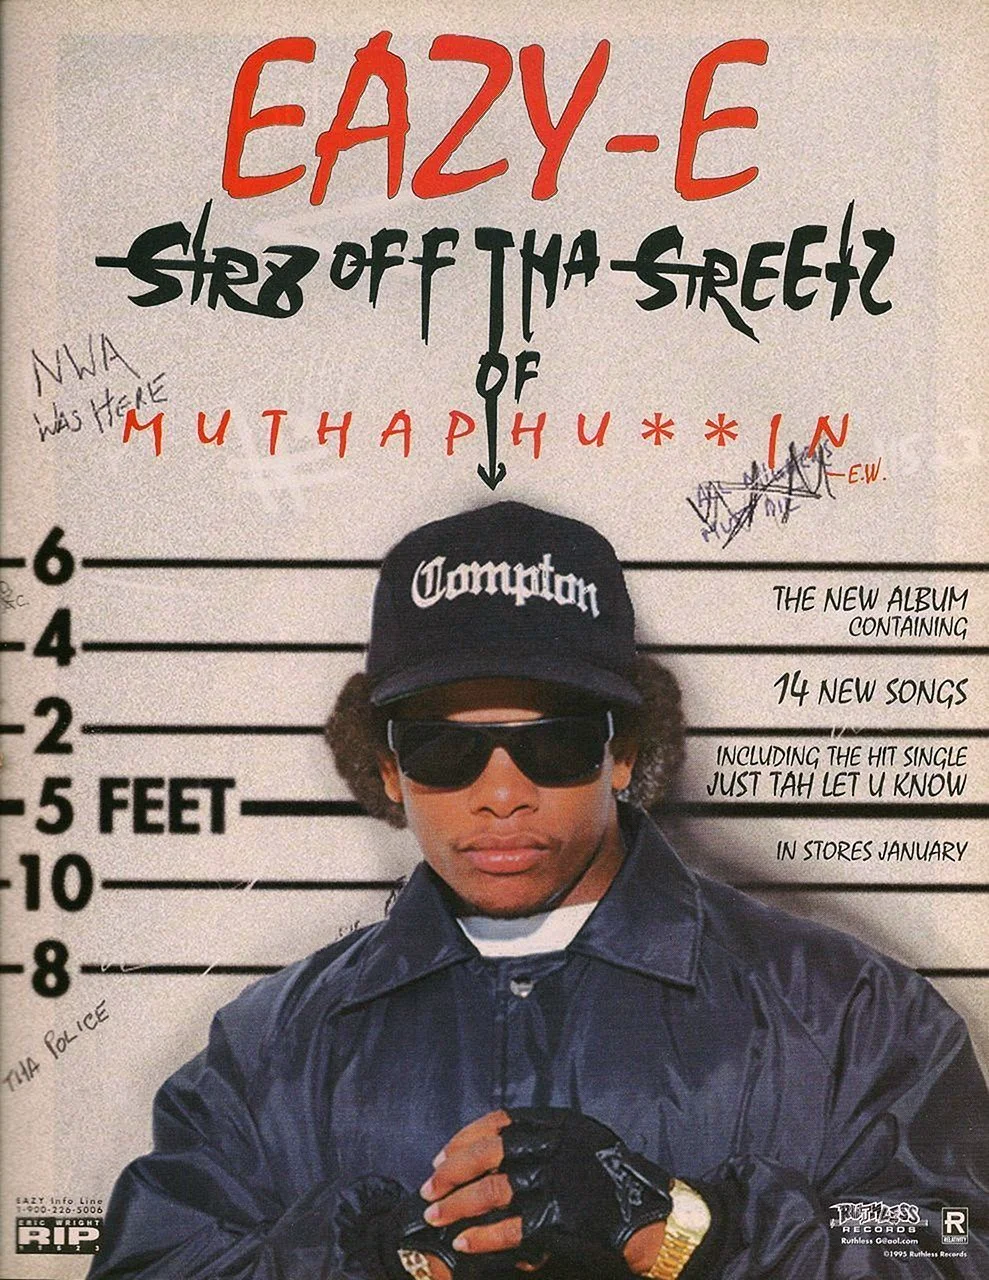 Eazy-E Poster Wallpaper For iPhone